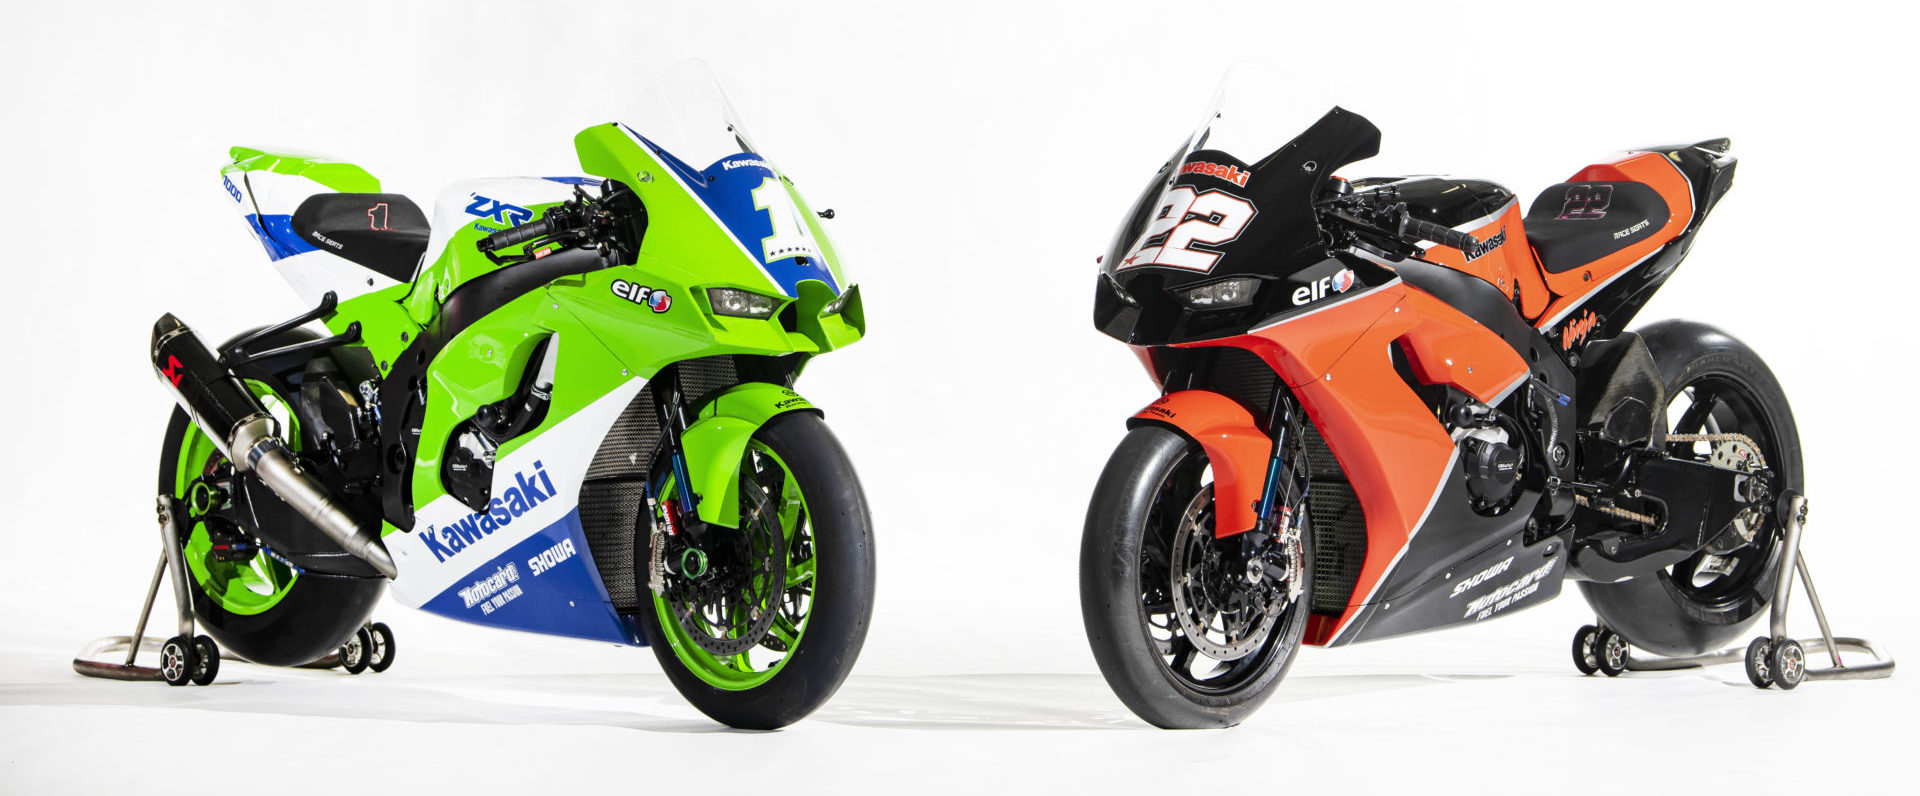 Jonathan Rea's Kawasaki ZX-10RR (1) and Alex Lowes' Superbike (22) in retro-themed liveries used this past weekend in Argentina. Photo courtesy Kawasaki.